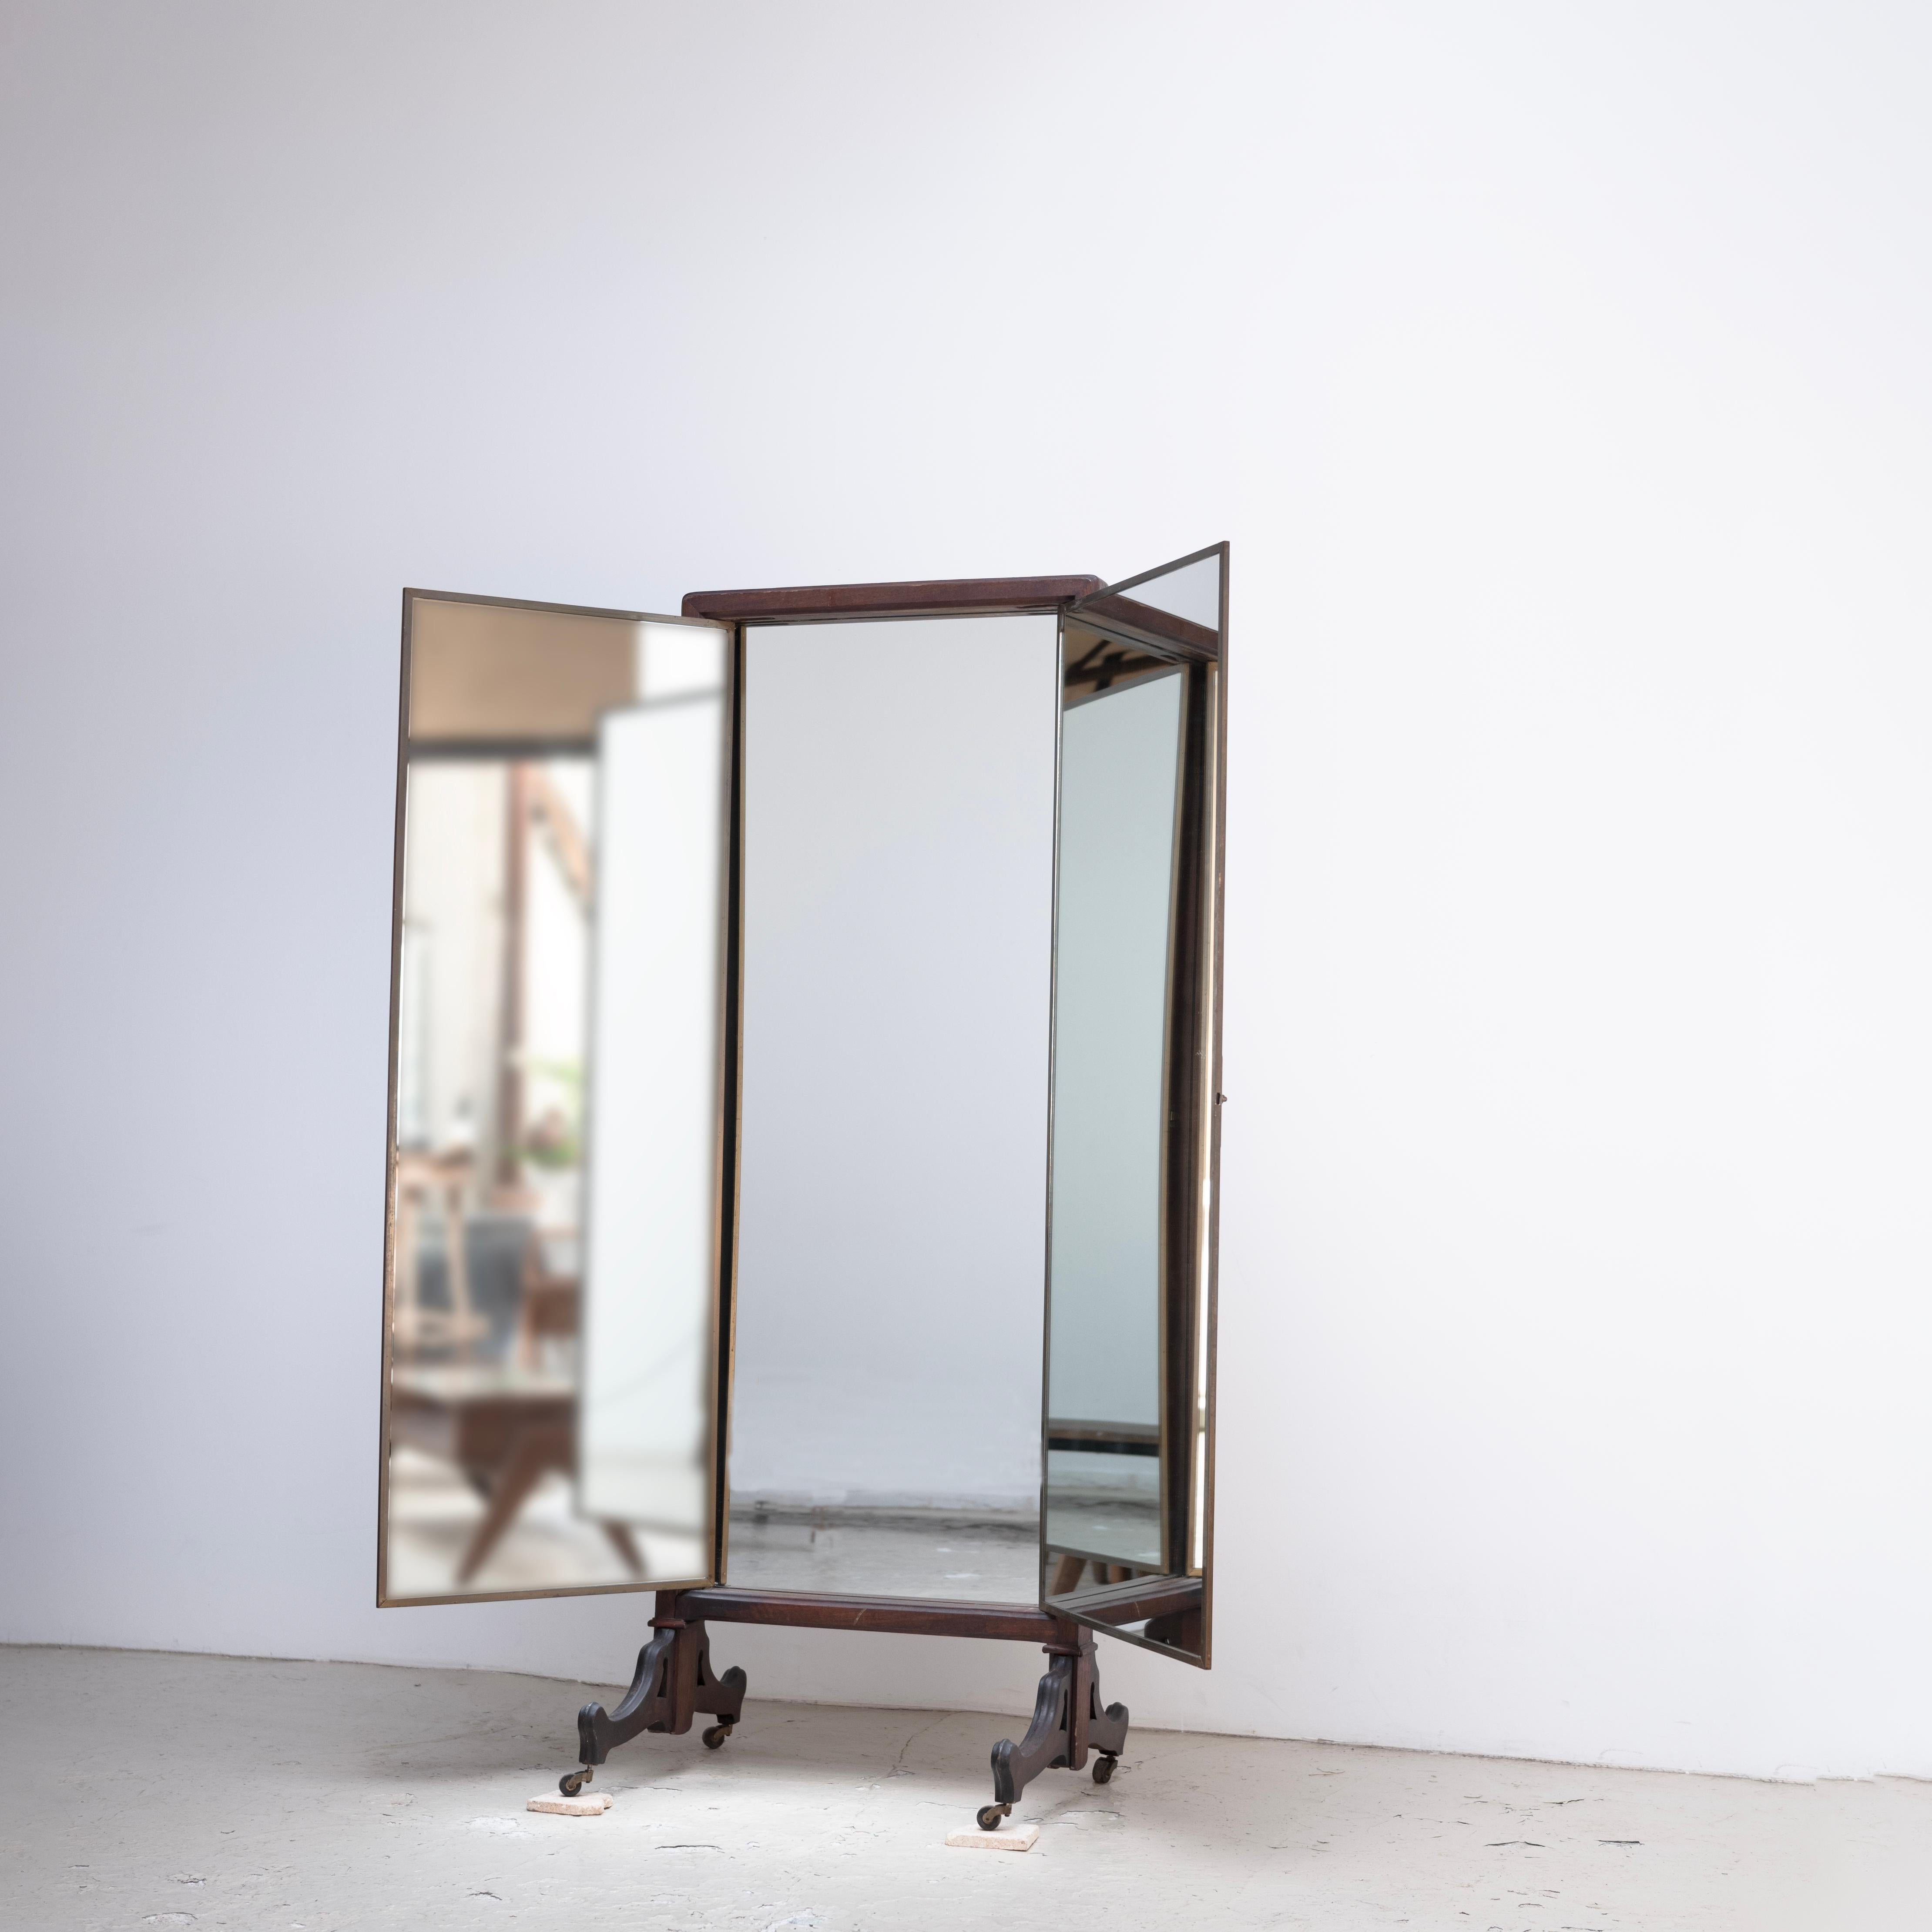 1920s , Vintage Three fold mirror , MIROIR BROT , France
I plan to disassemble the legs to reduce shipping costs!